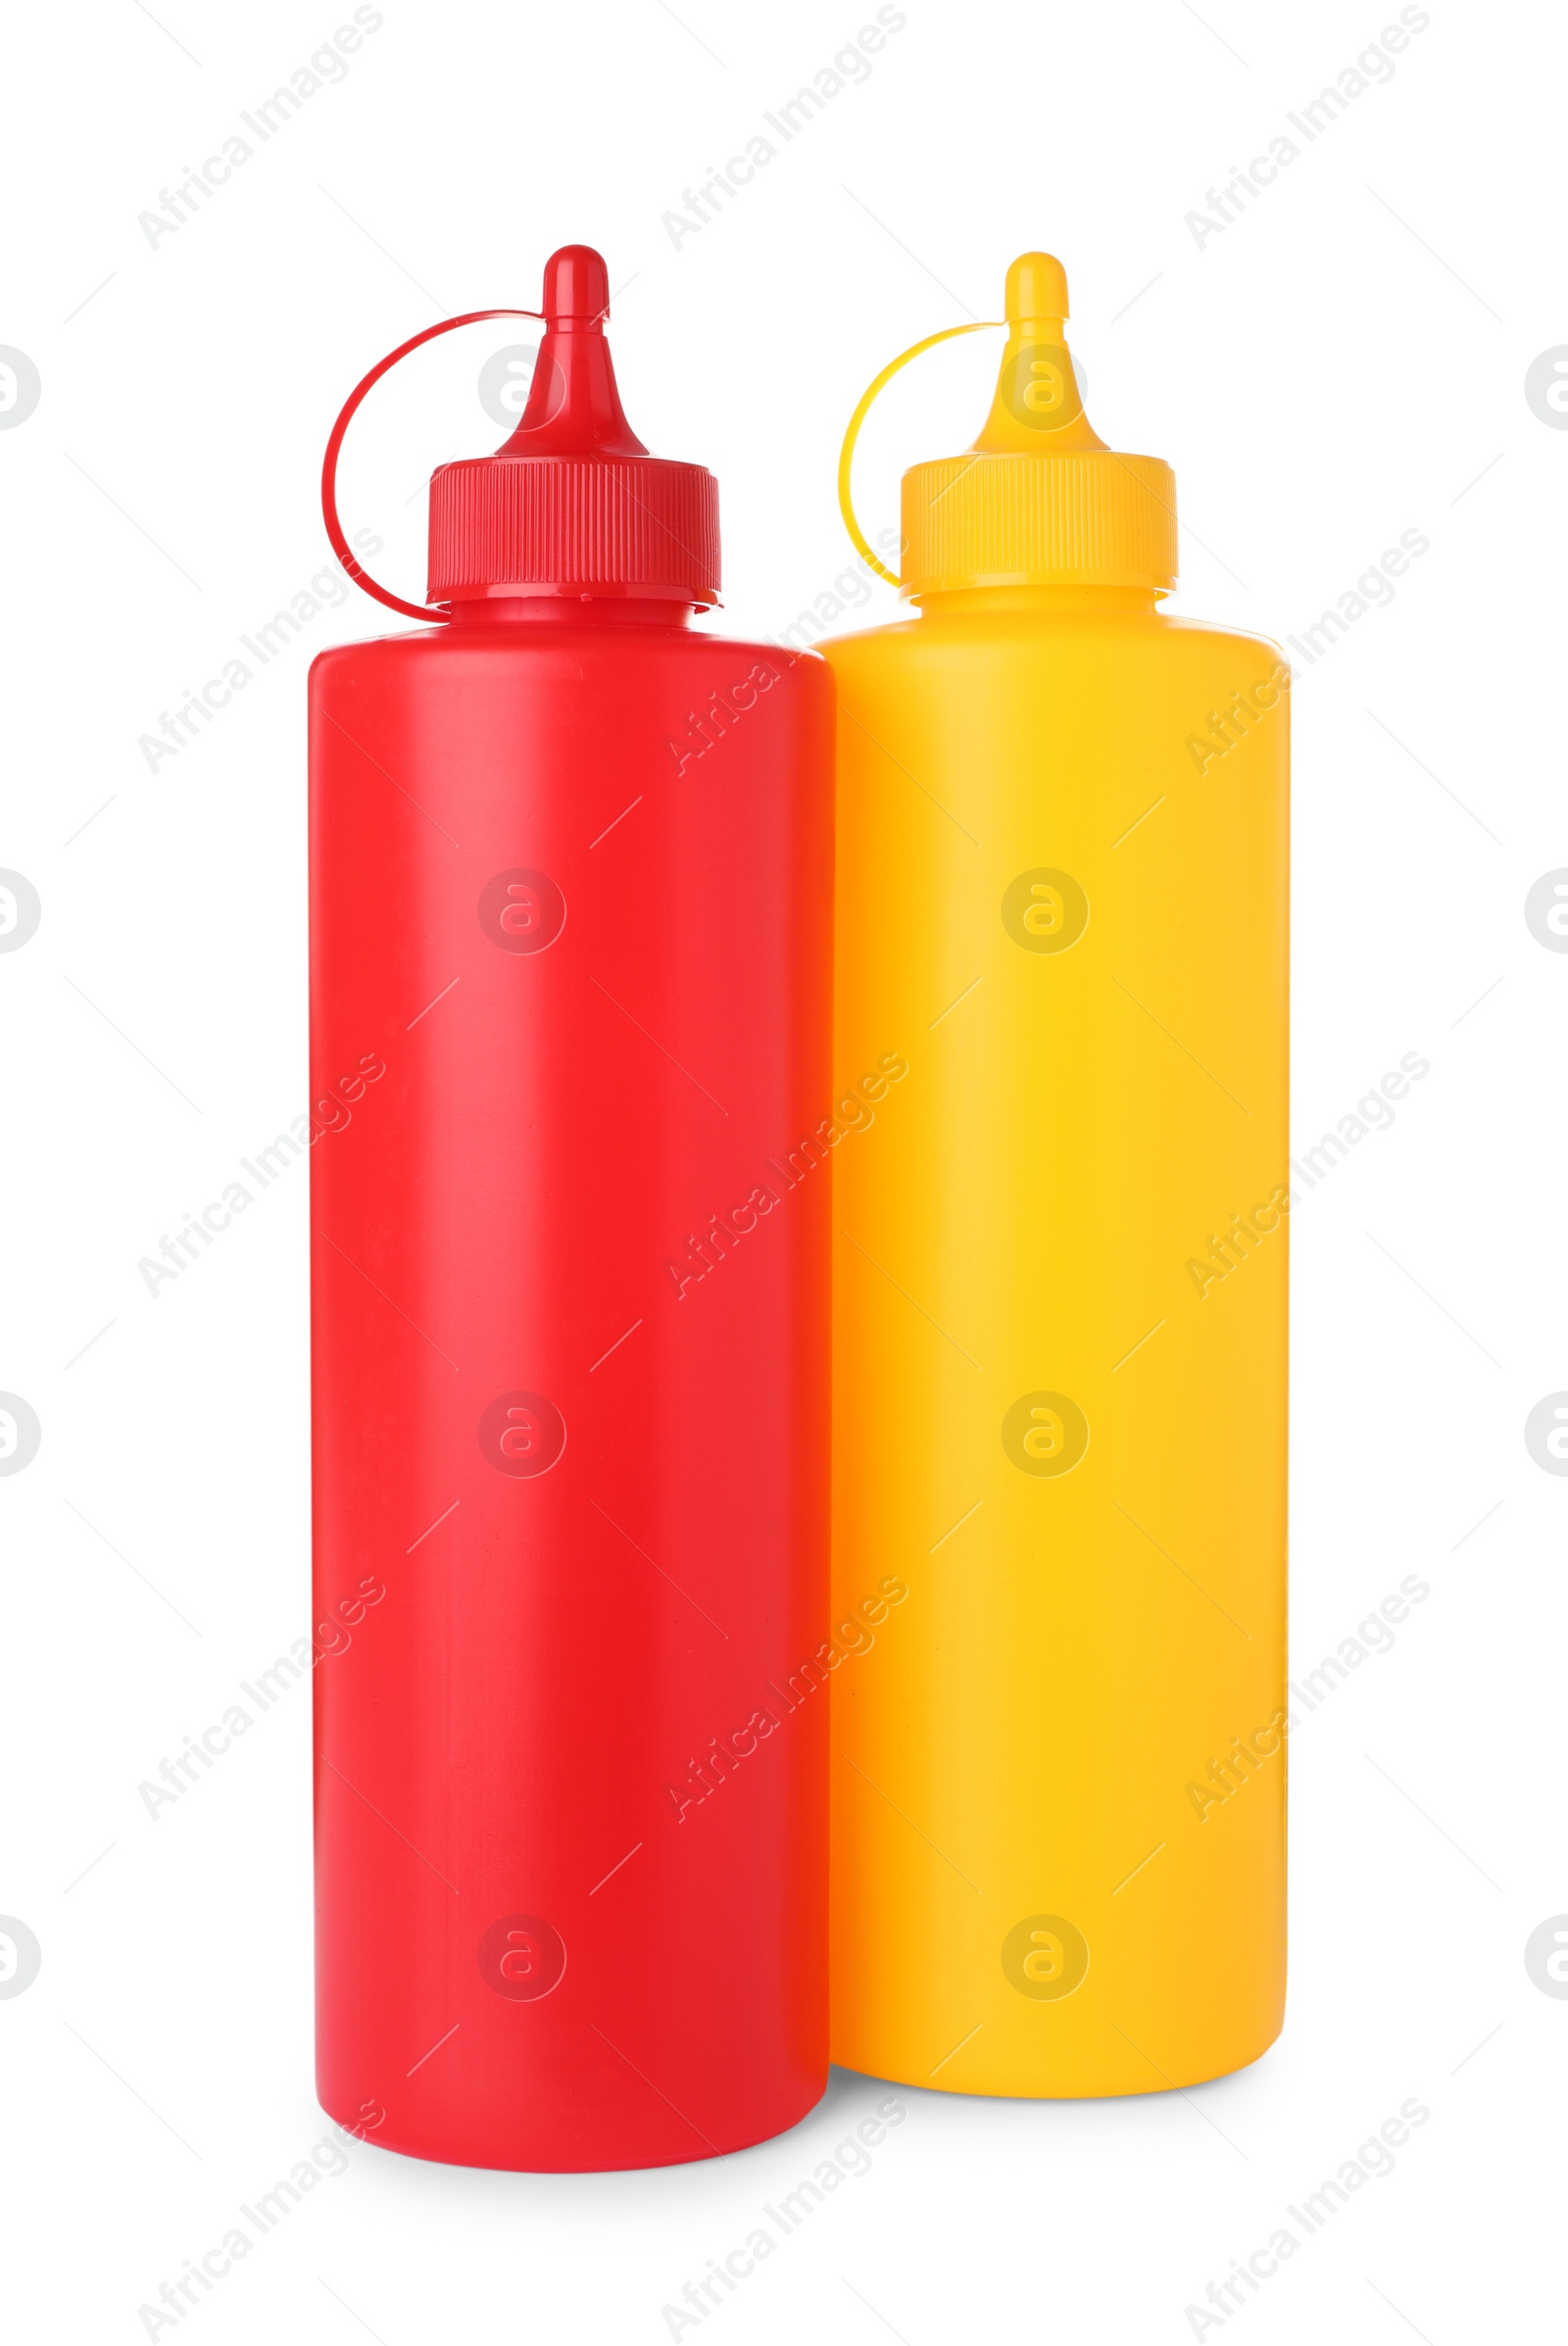 Photo of Plastic bottles of tasty ketchup and mustard on white background